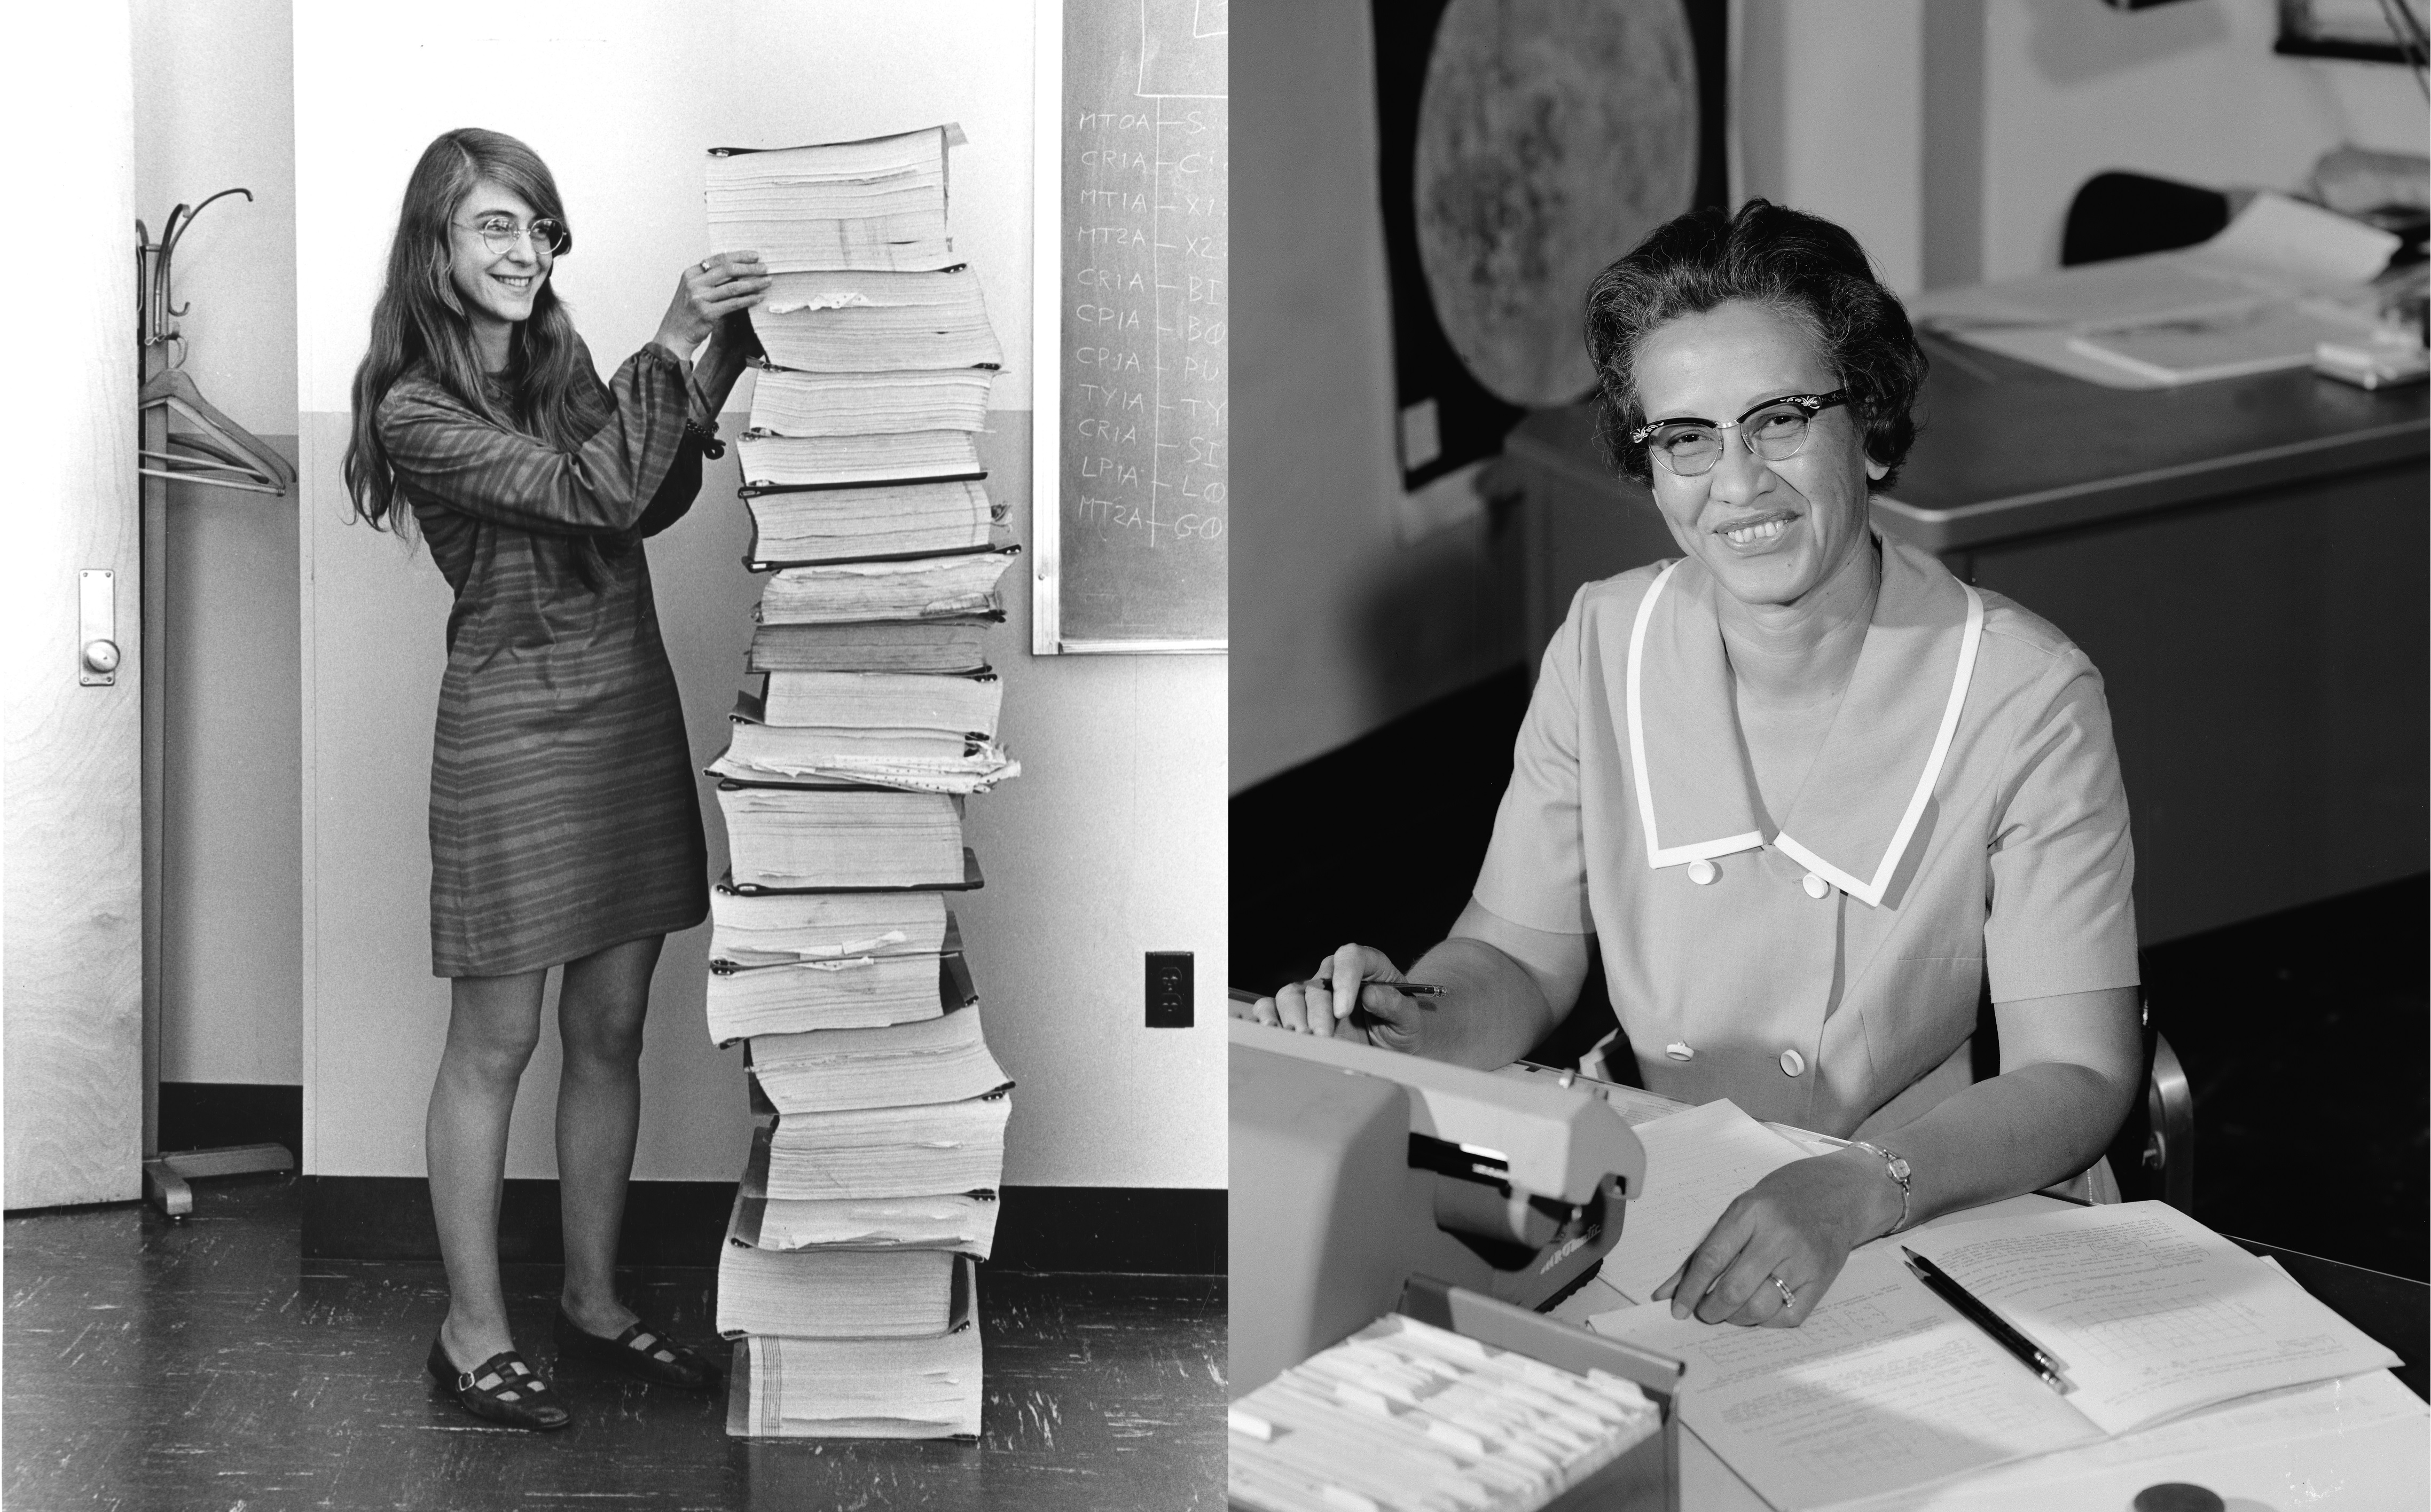 Left: an image of a women in a 1960s dress standing beside a stack of paper as tall as she is. Right: an African-American woman working on an early desktop computer.